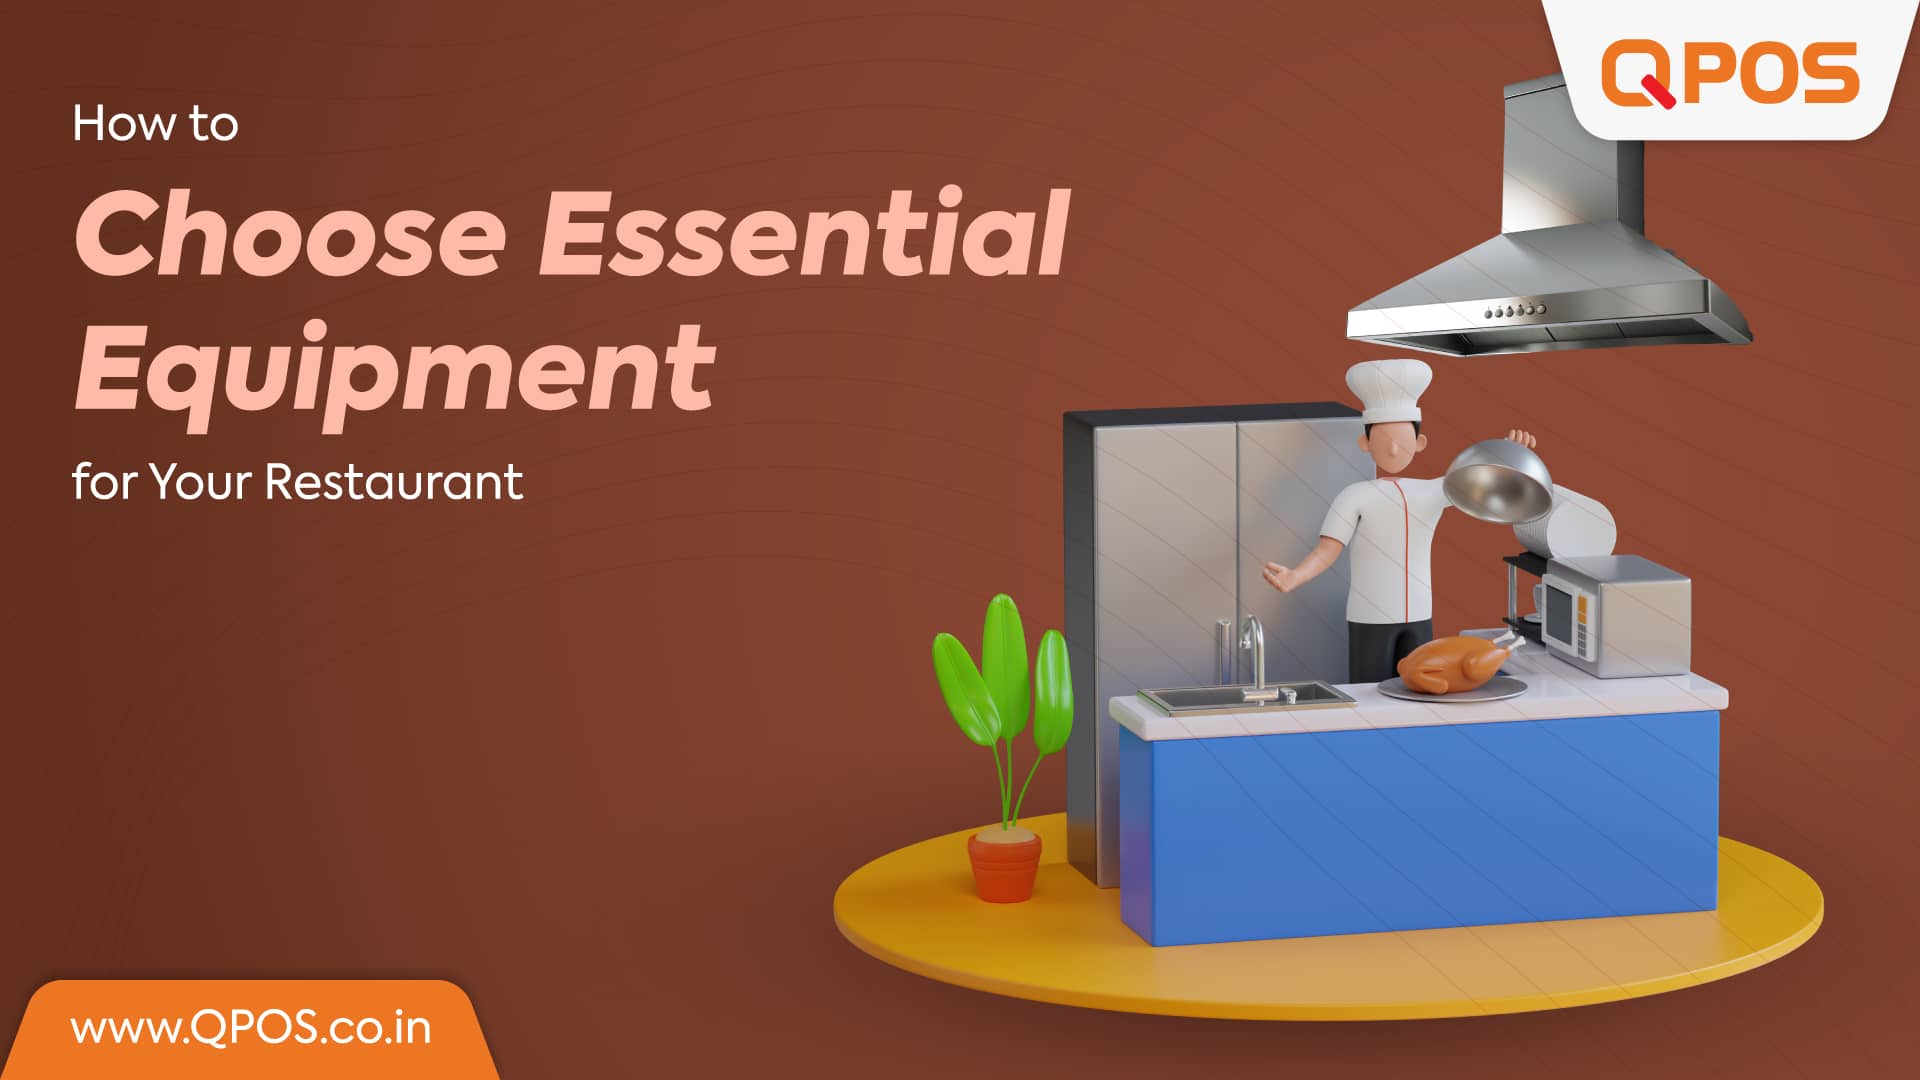 How to Choose Essential Equipment for Your Restaurant